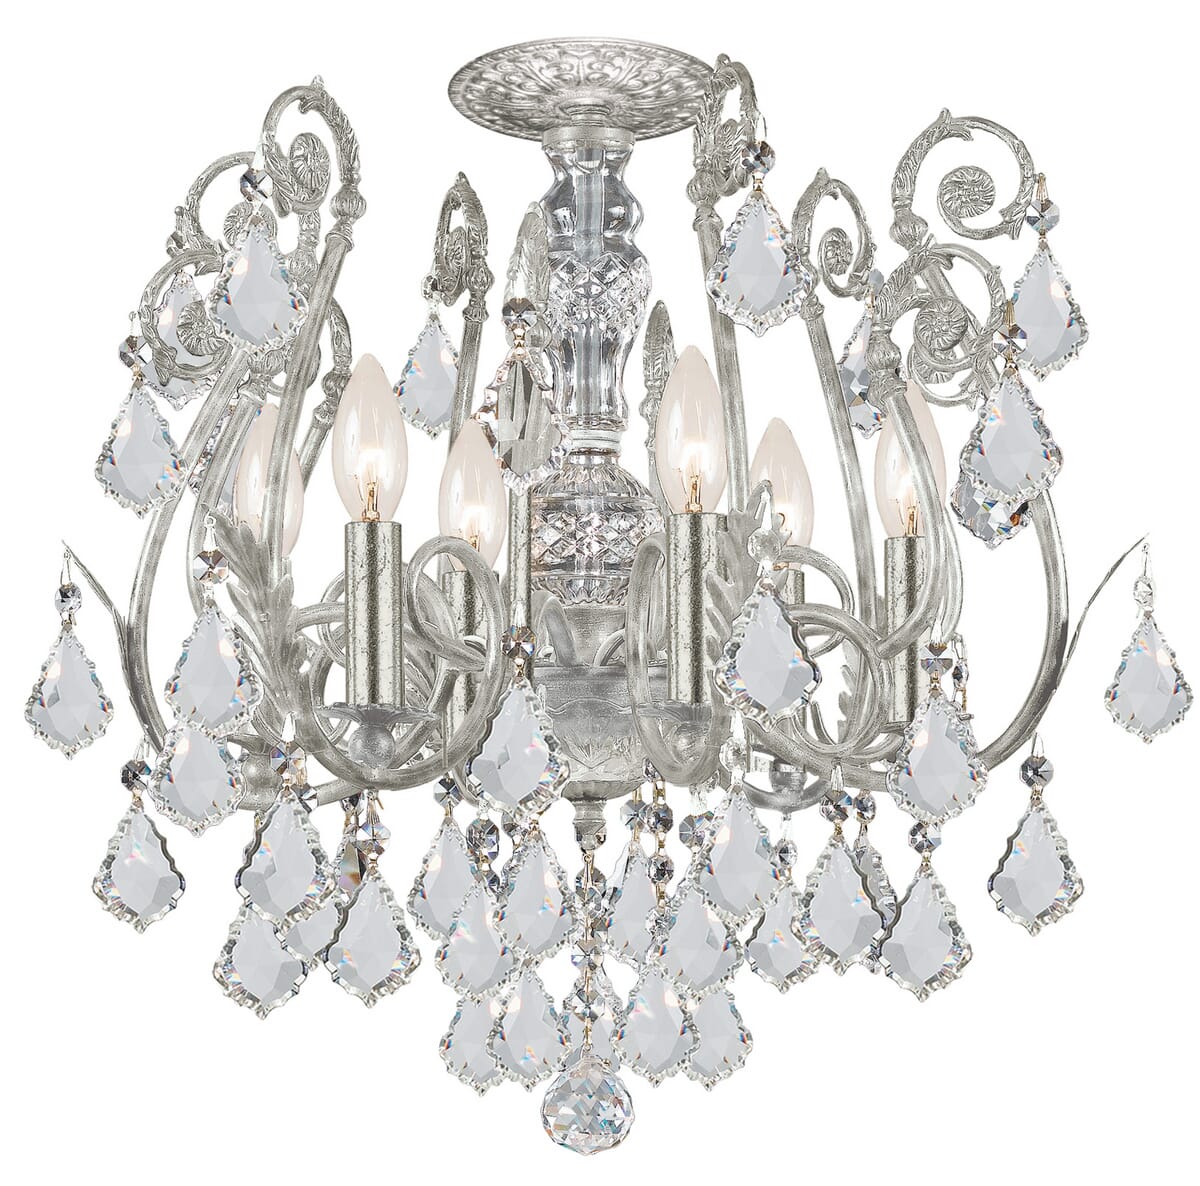 Regis 6-Light 20"" Ceiling Light in Olde Silver with Clear Hand Cut Crystals -  Crystorama, 5115-OS-CL-MWP